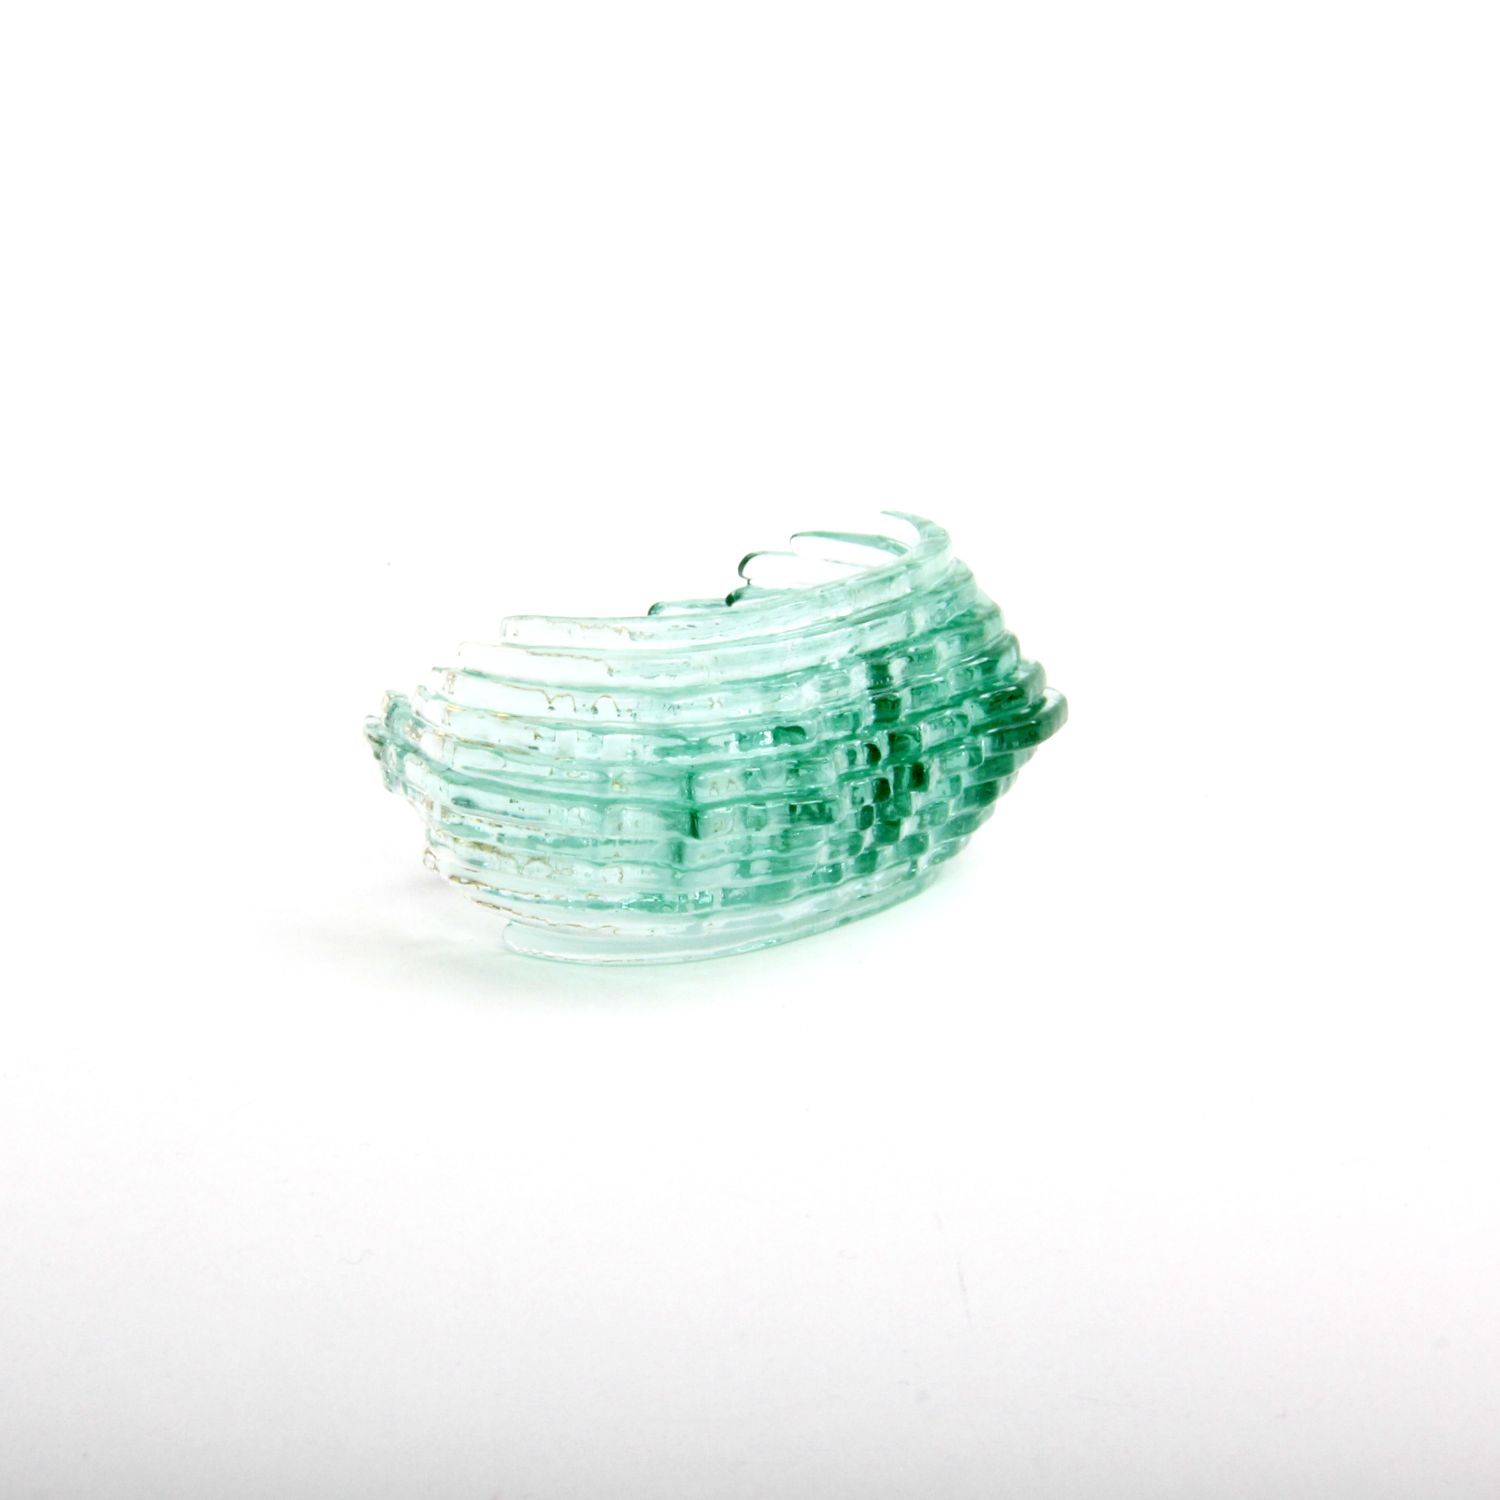 Broken Plates: Jade Curly Moss Blend Cuff Product Image 1 of 4